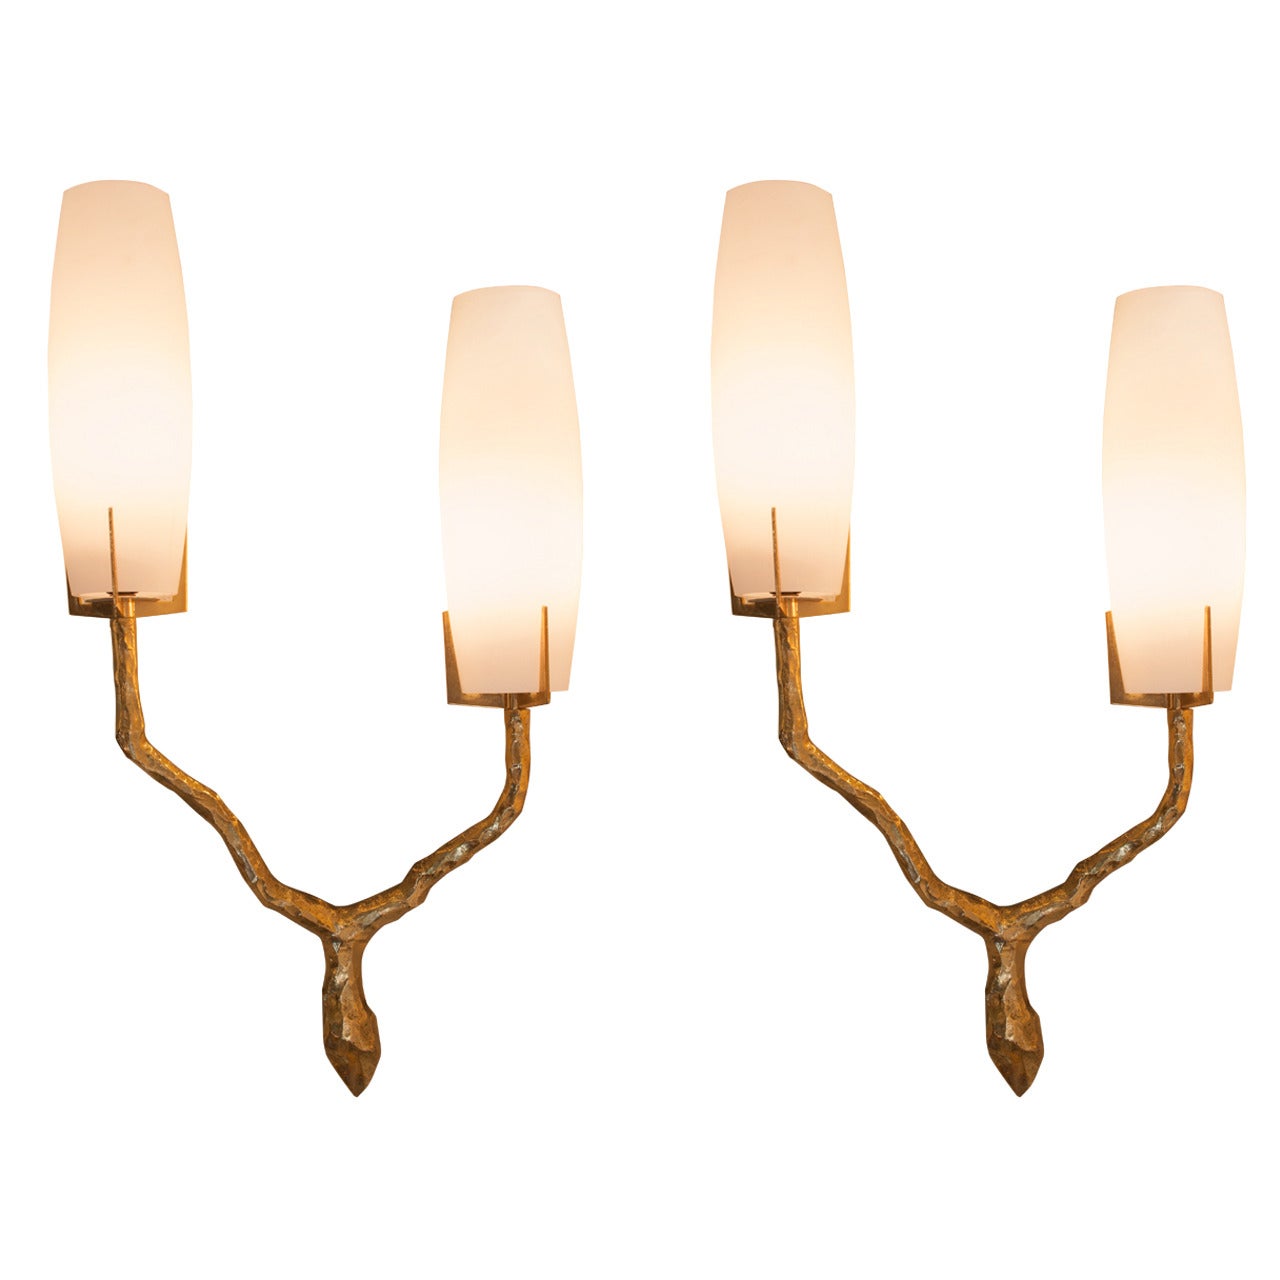 Pair of Wall Lights by Maison Arlus